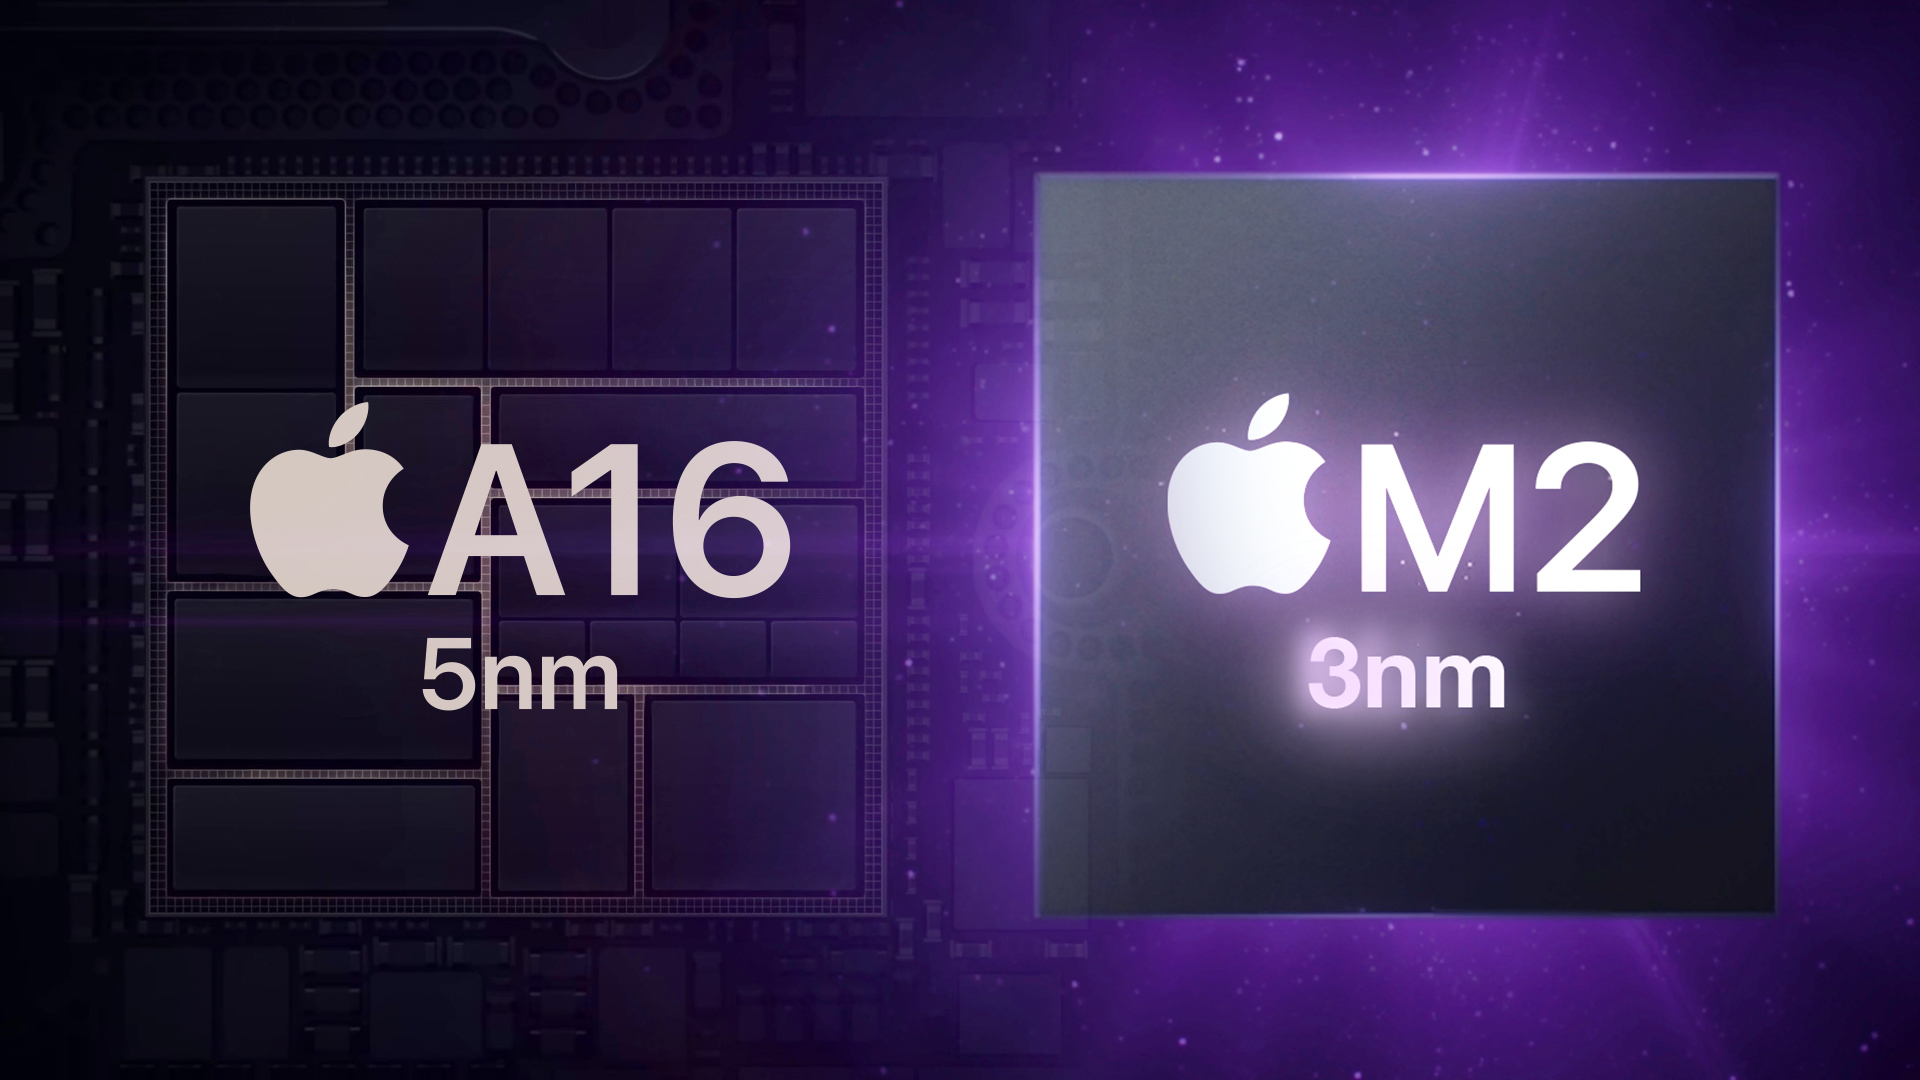 Alleged Apple Chip Plans Suggest ‘A16’ Will Stick With 5nm, ‘M2’ to Make Jump to 3nm Instead